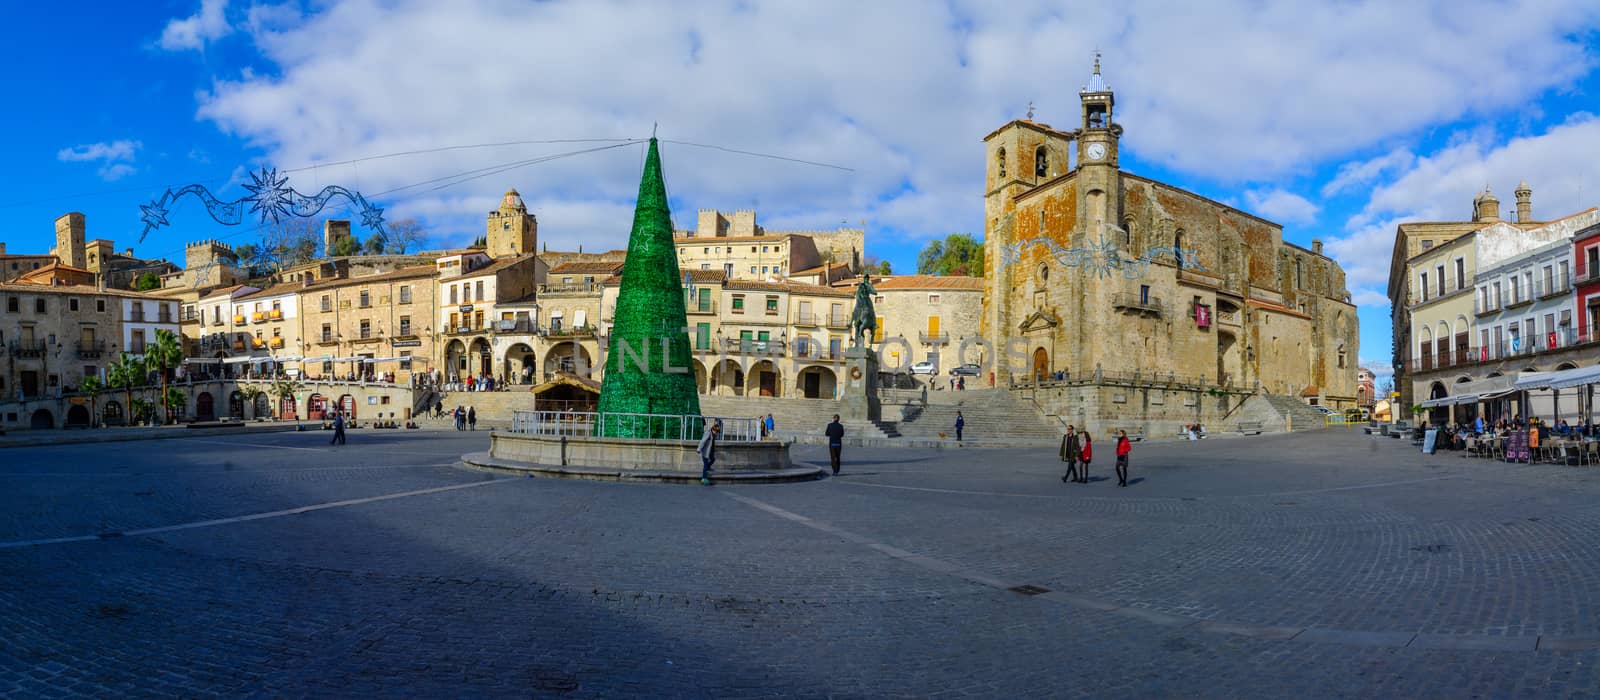 TRUJILLO, SPAIN - DECEMBER 30, 2017: Panoramic view of Plaza Mayor, with San Martin church, a Christmas tree, locals and visitors, in Trujillo, Extremadura, Spain